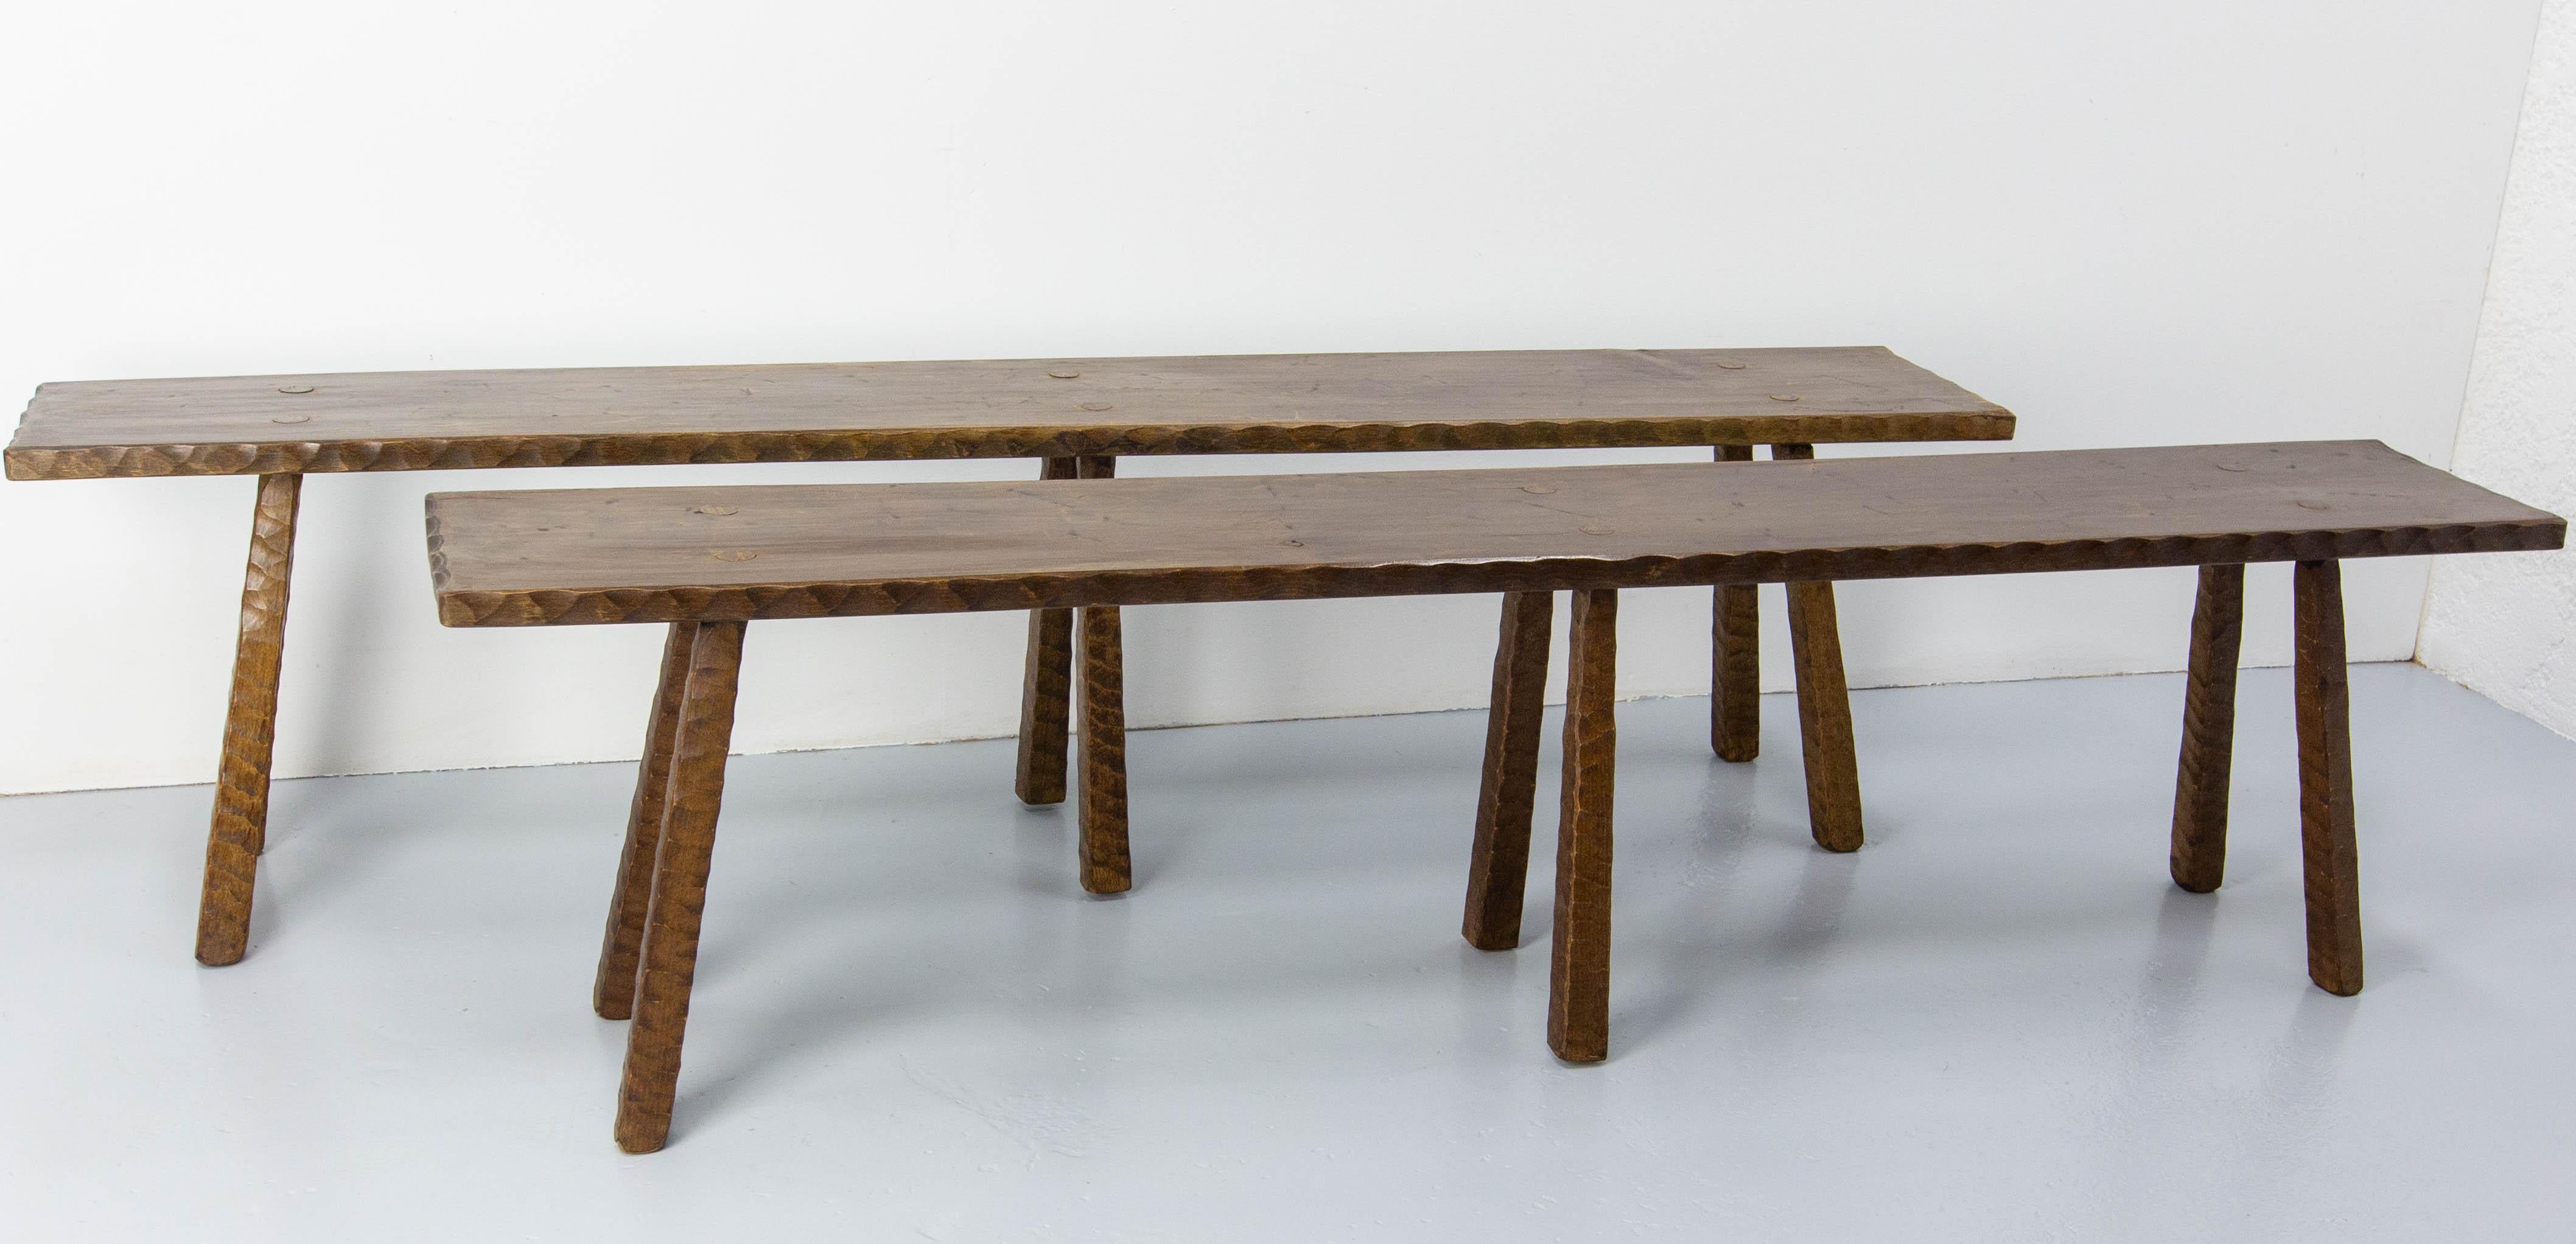 Spanish pair of benches made in 1960.
The legs of the benches as well as the edges of the seats have been worked to give a brutalist style.
In original vintage condition, sound and solid.

Shipping:
28.5 / 186 / 49 cm 25 kg 